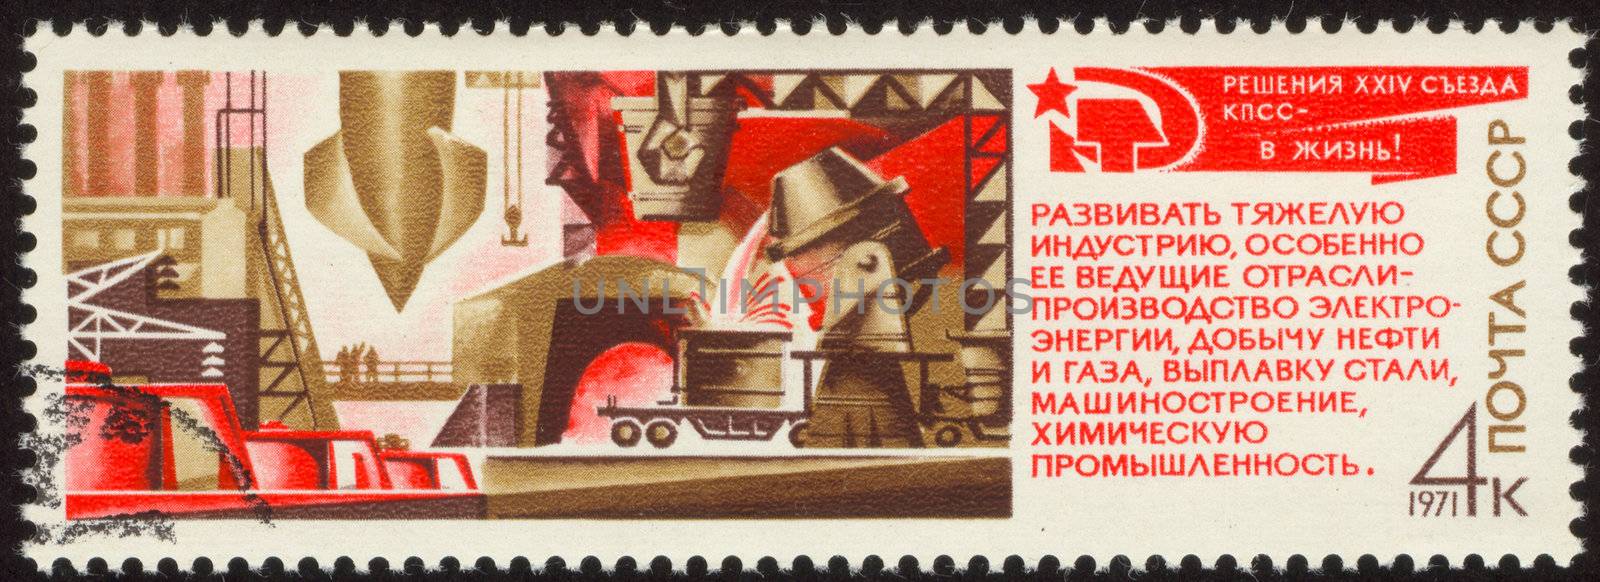 The scanned stamp. The Soviet stamp. Symbols of achievement of communism.